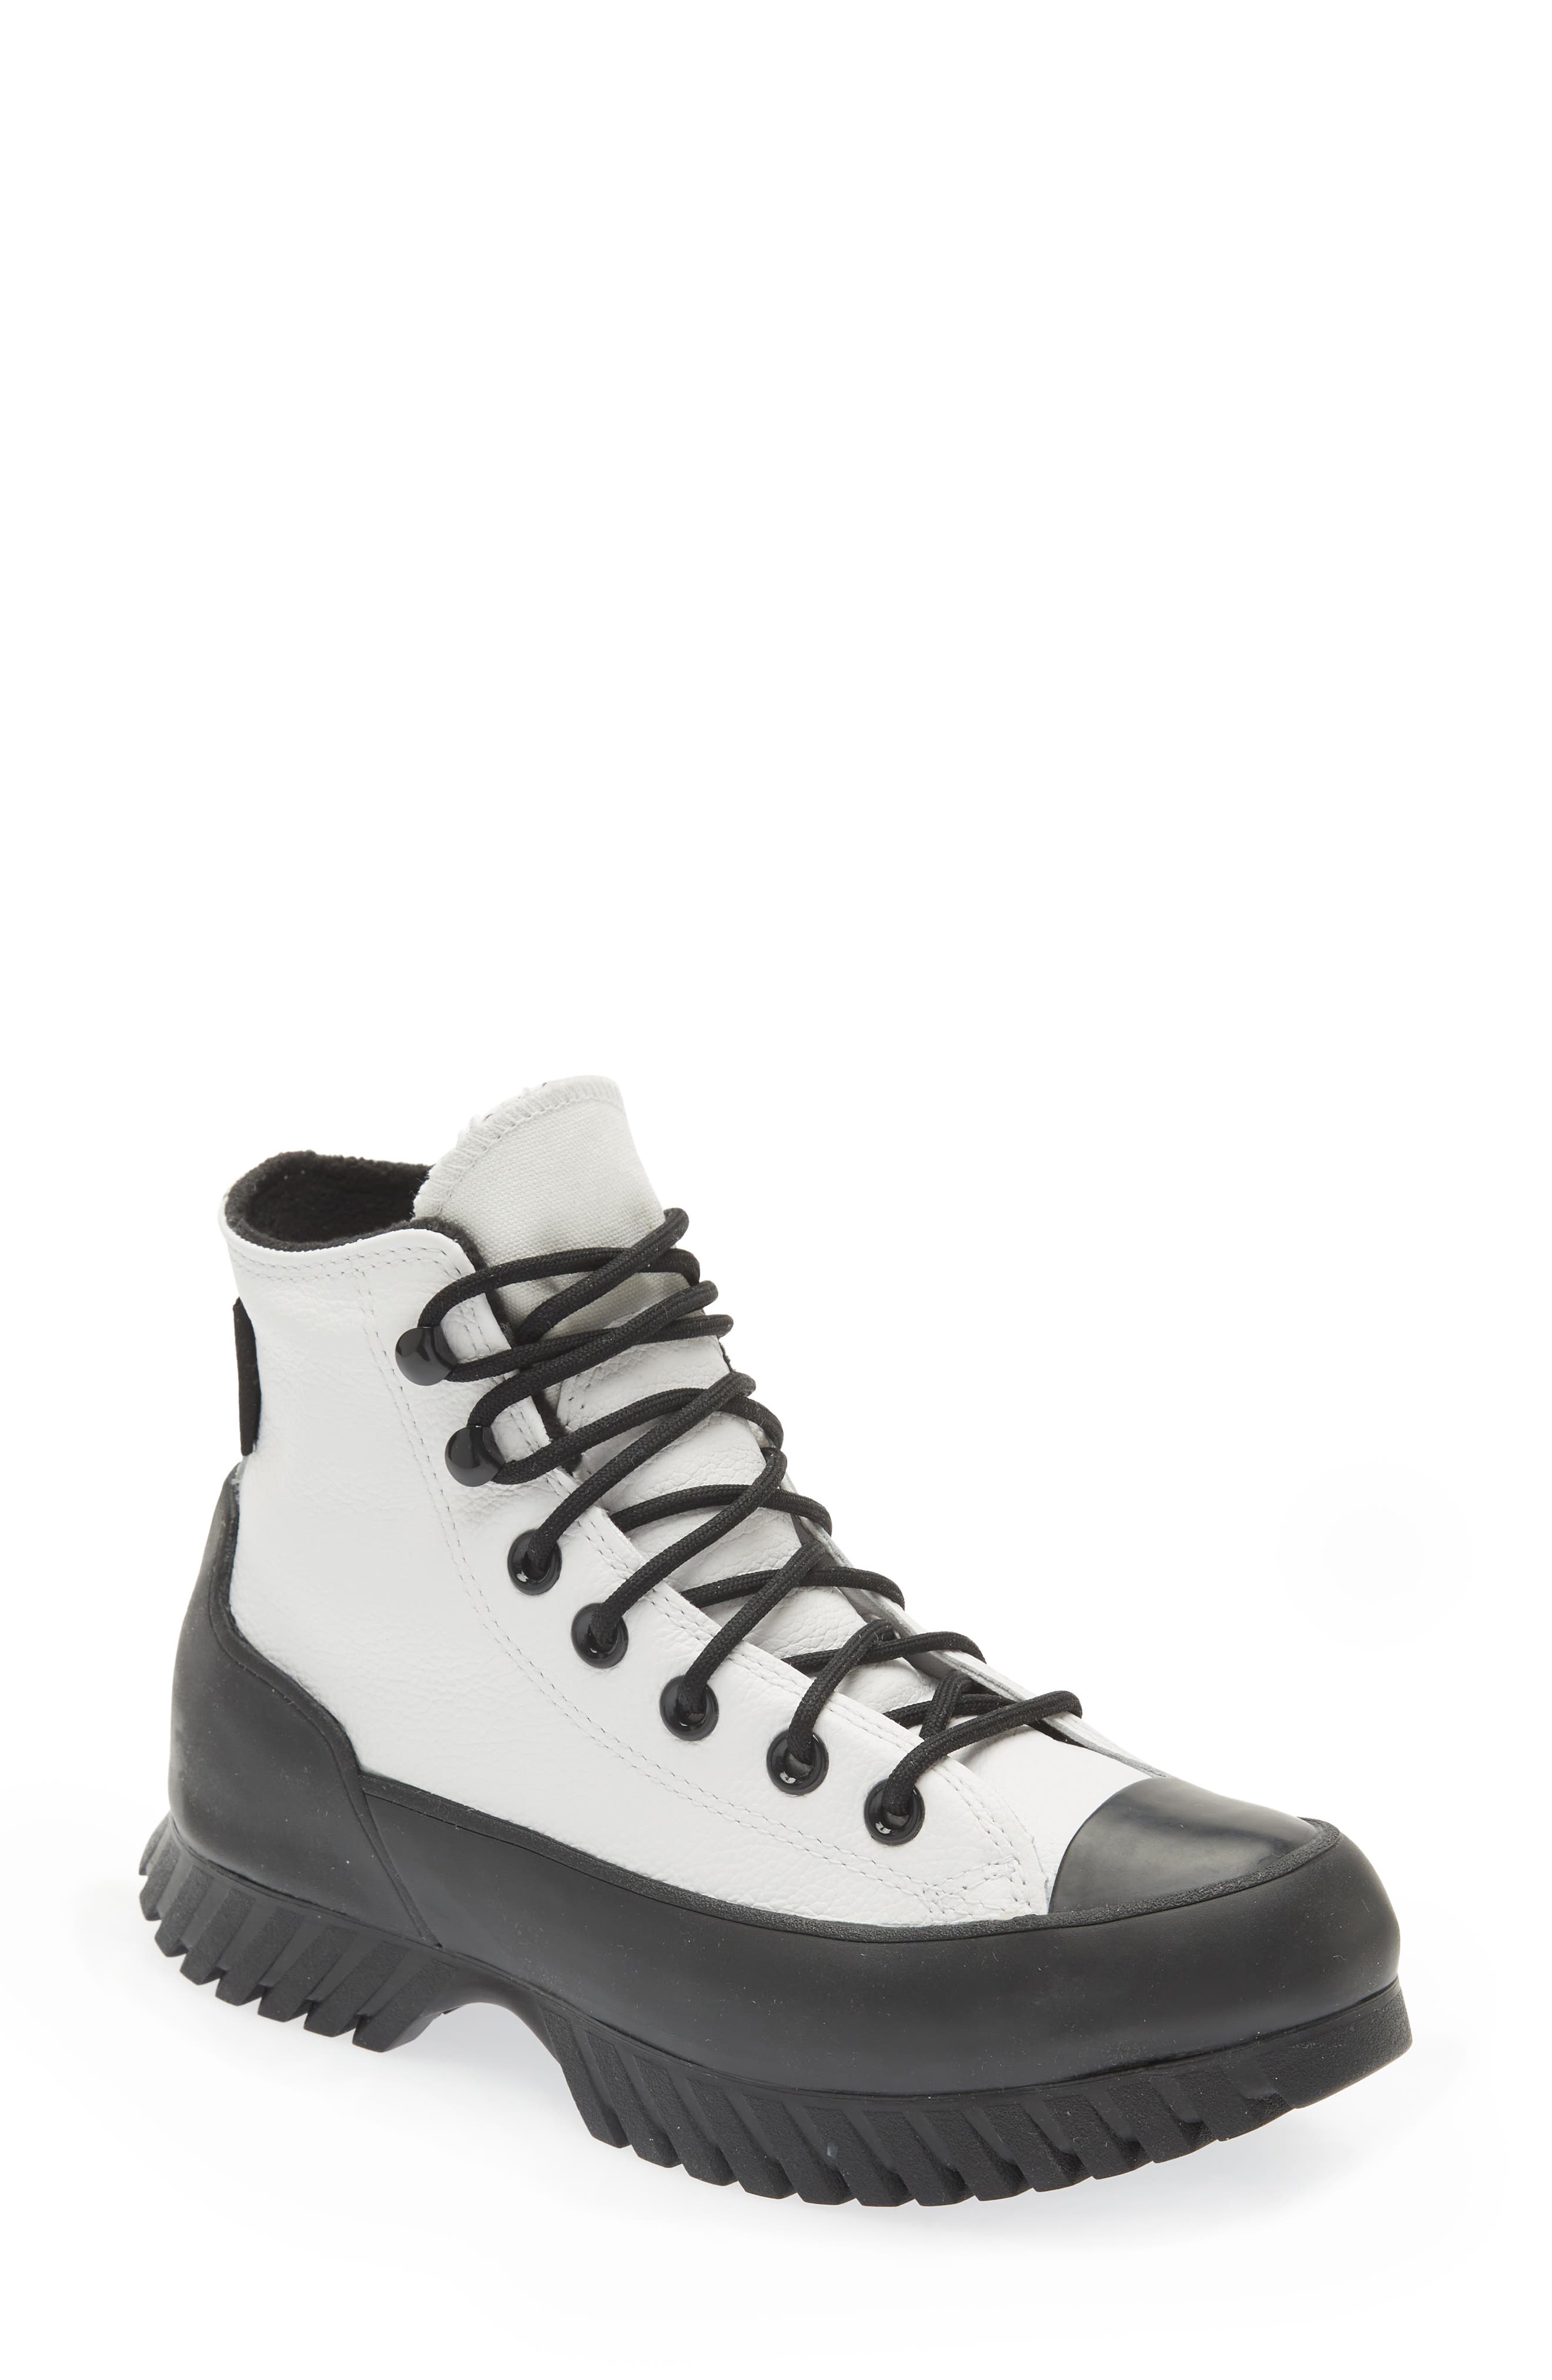 Converse Chuck Taylor(R) All Star(R) Lugged 2.0 Boot in White/Black/Black